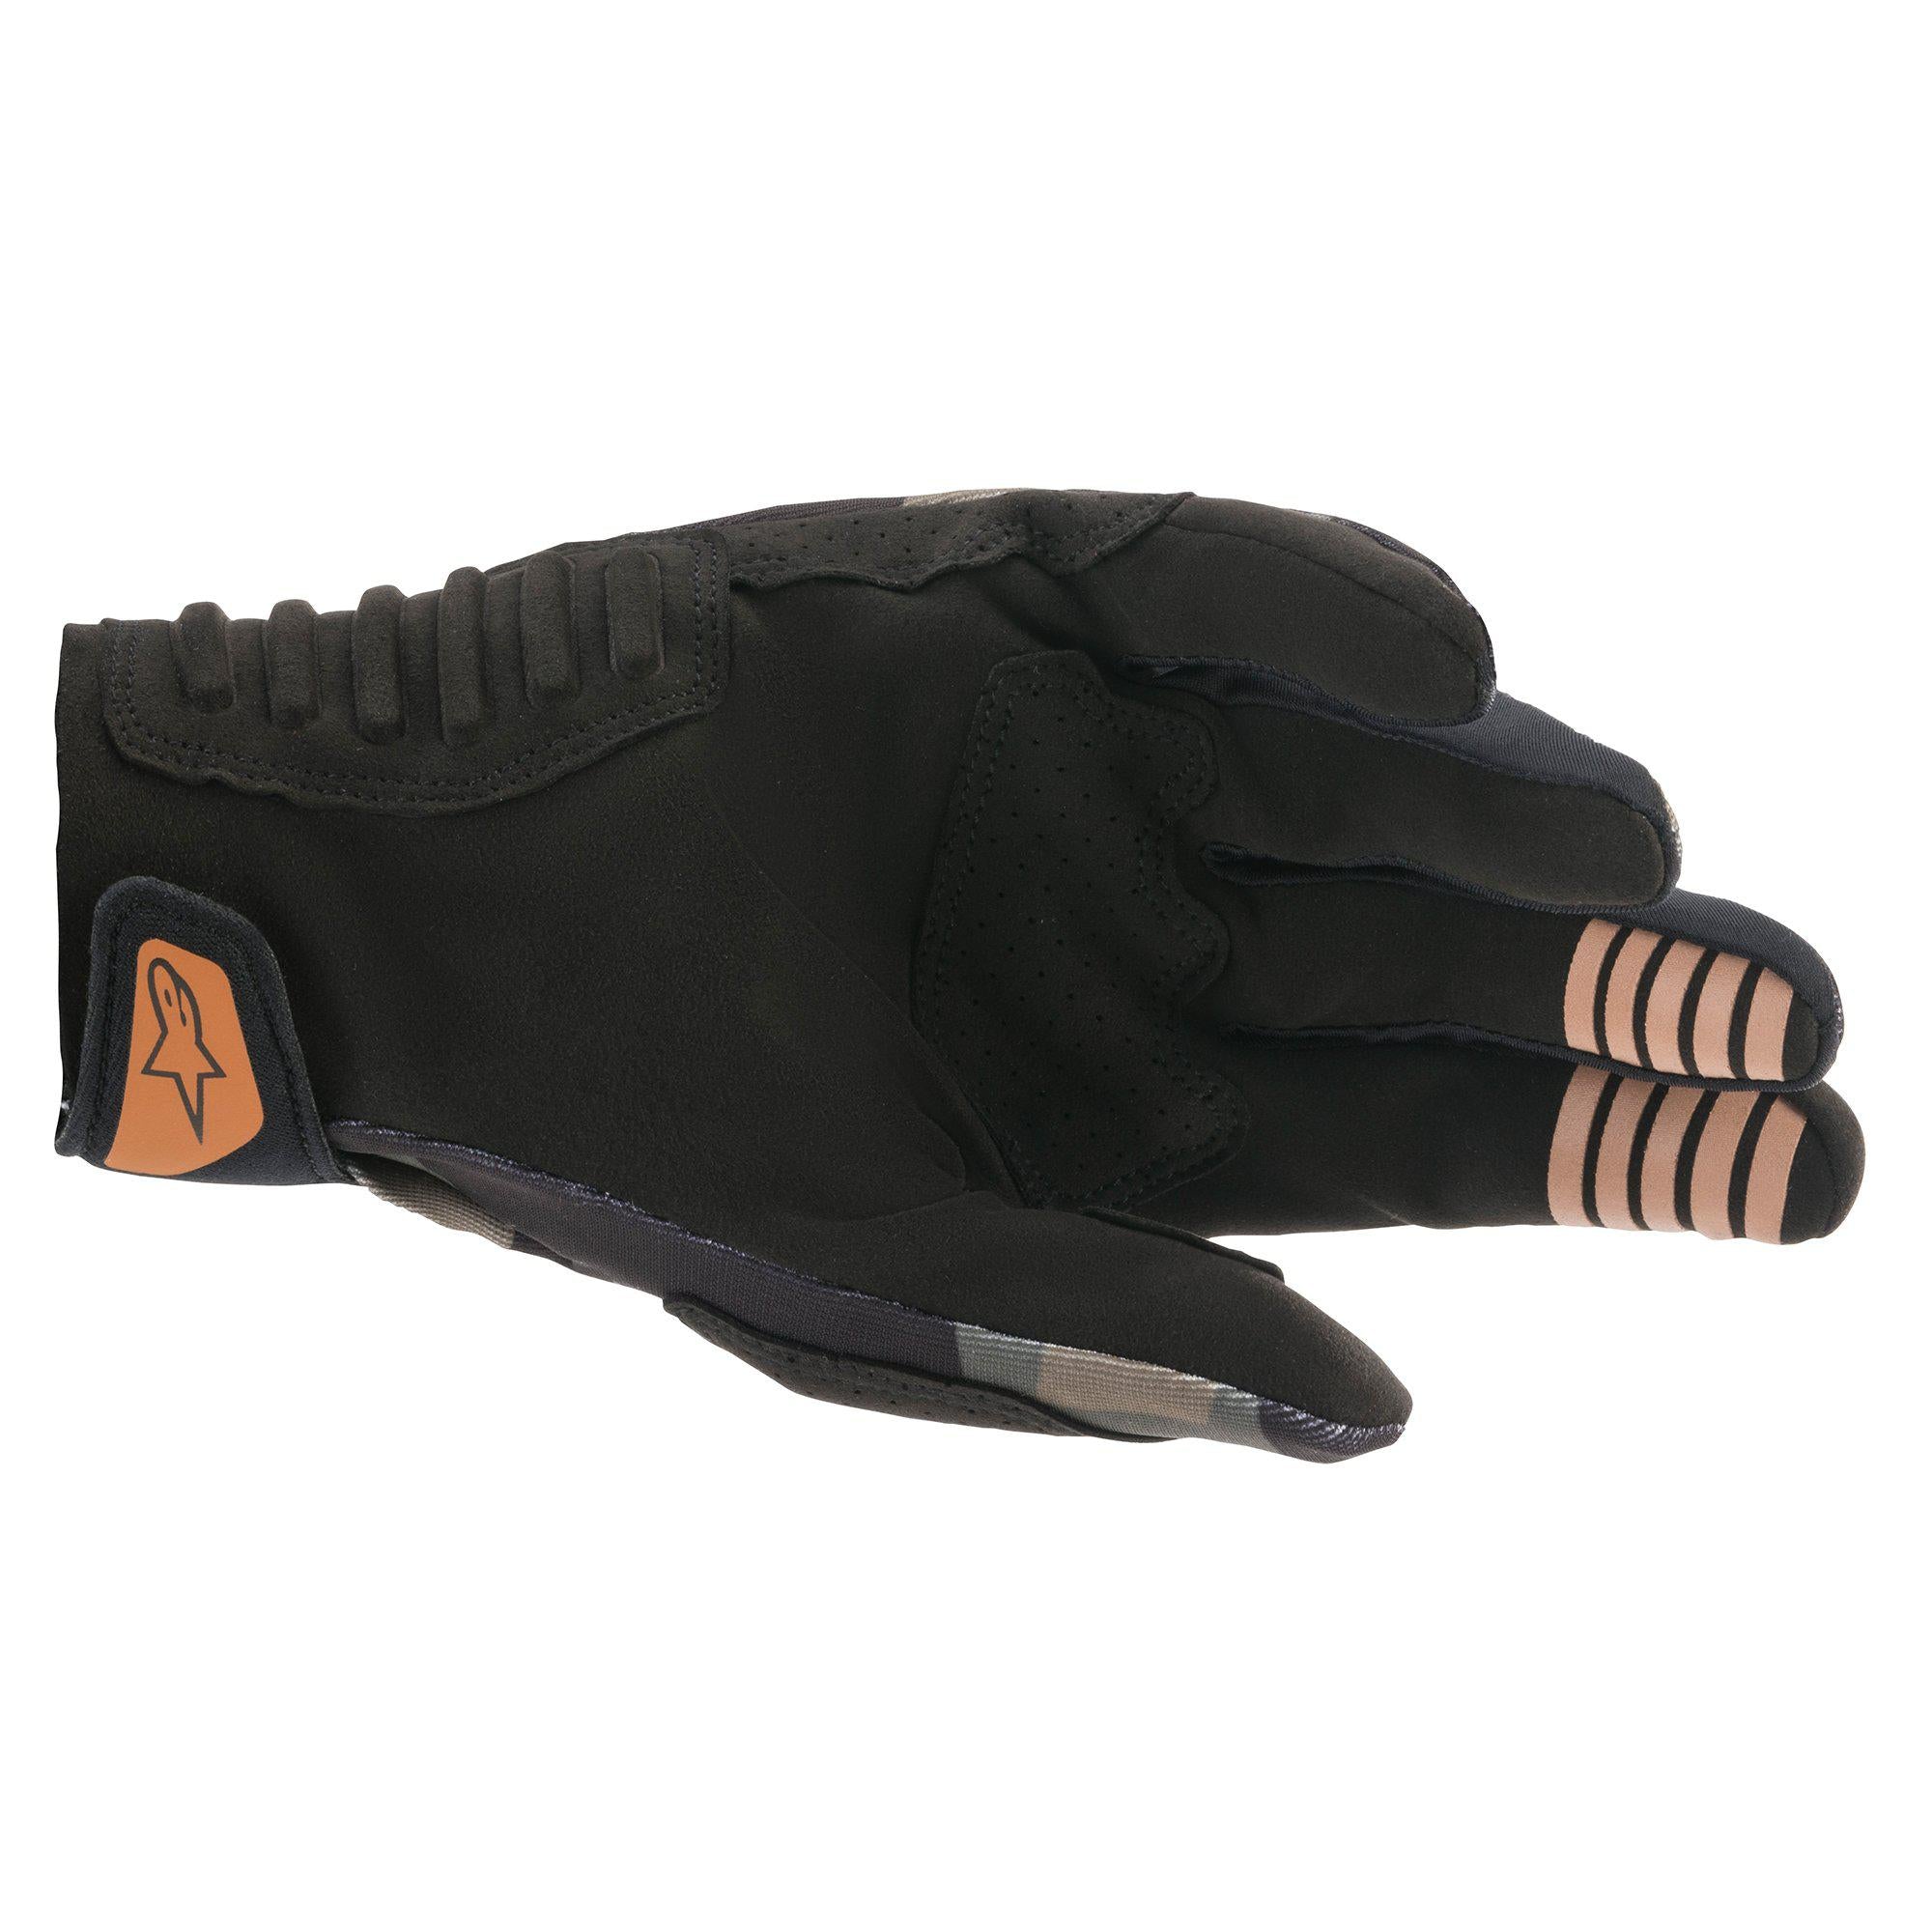 2021 SMX-E Offroad Gloves